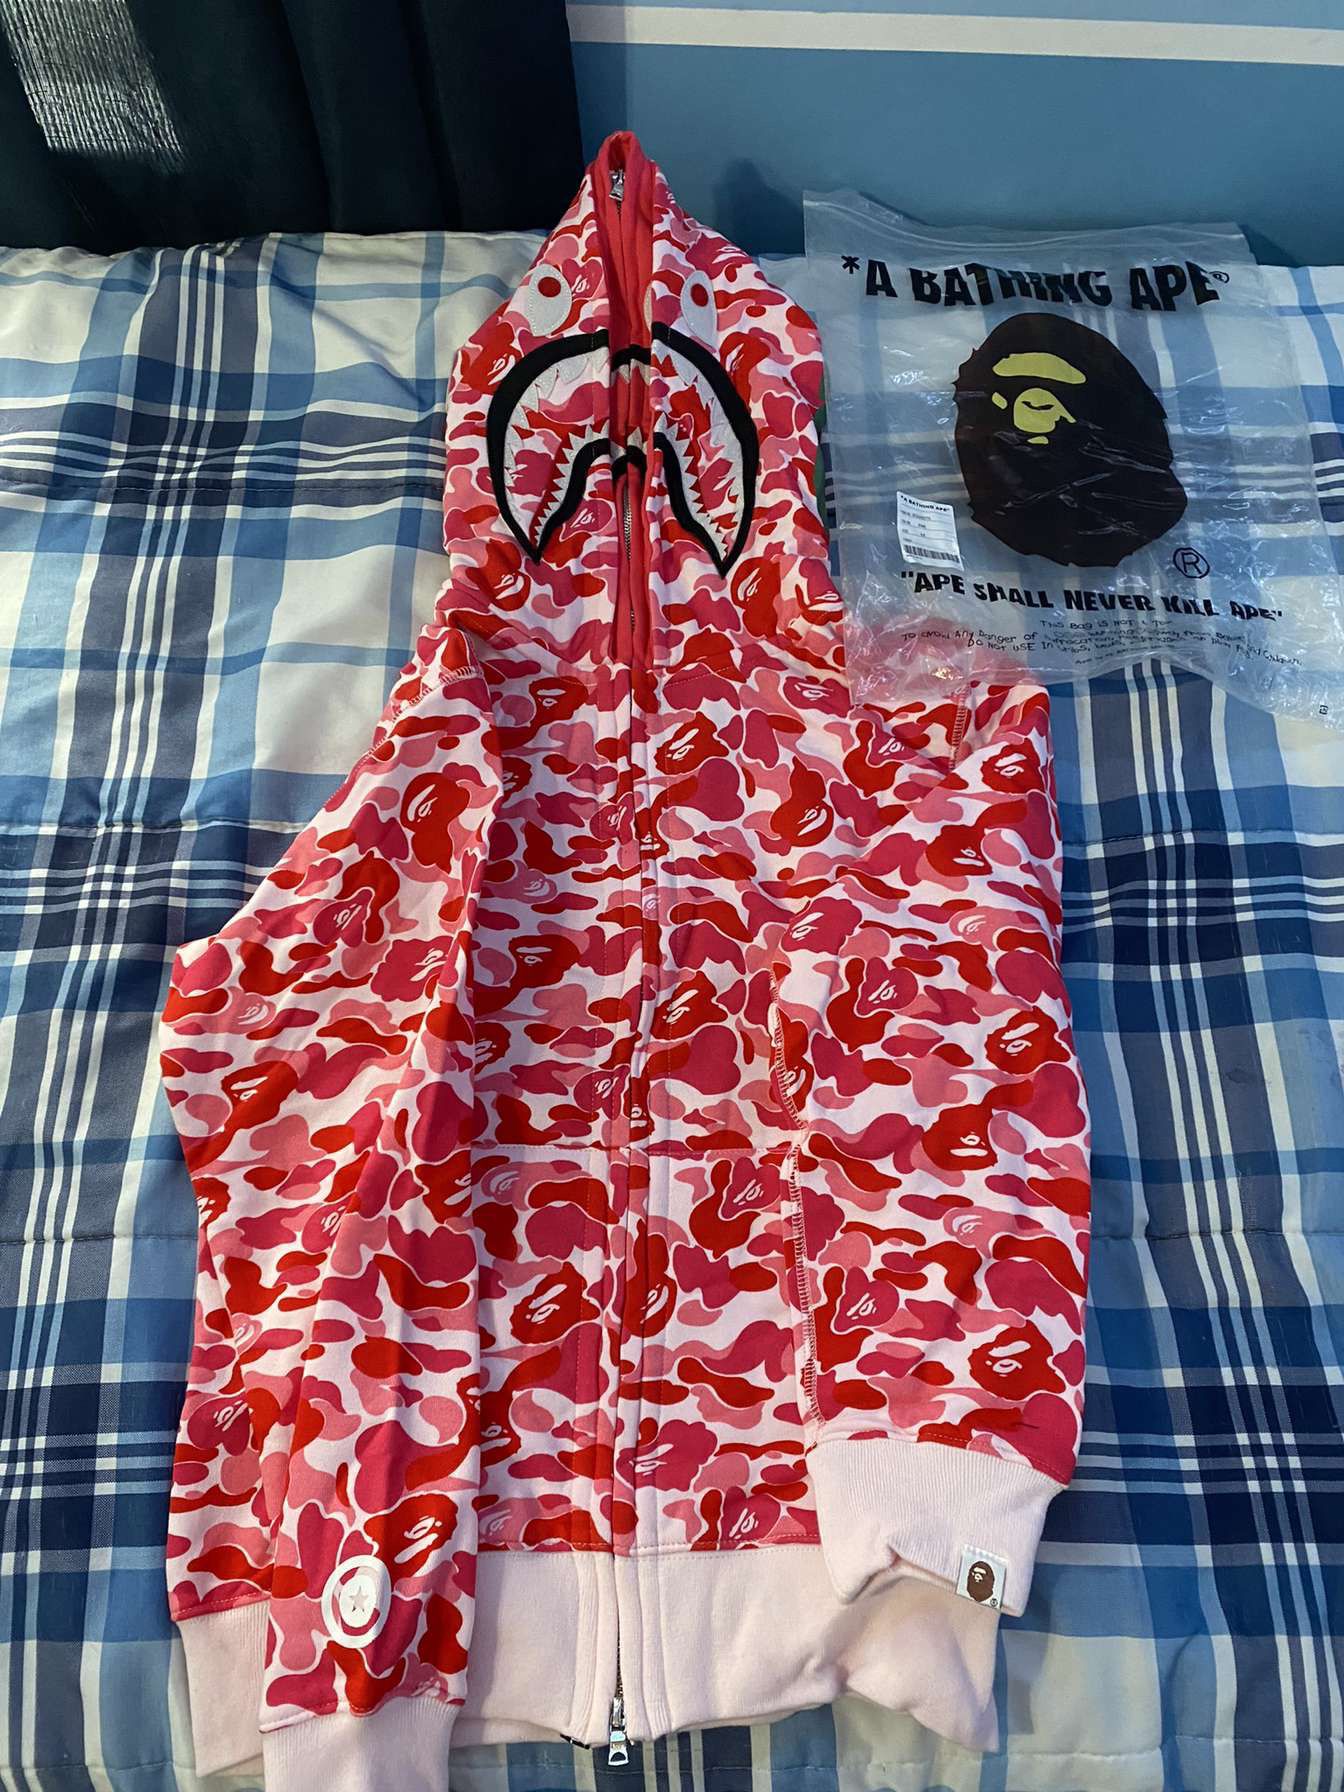 Bape Hoodie Large, NOT ACTUALLY FREE LOOKING FOR BEST OFFER!!!